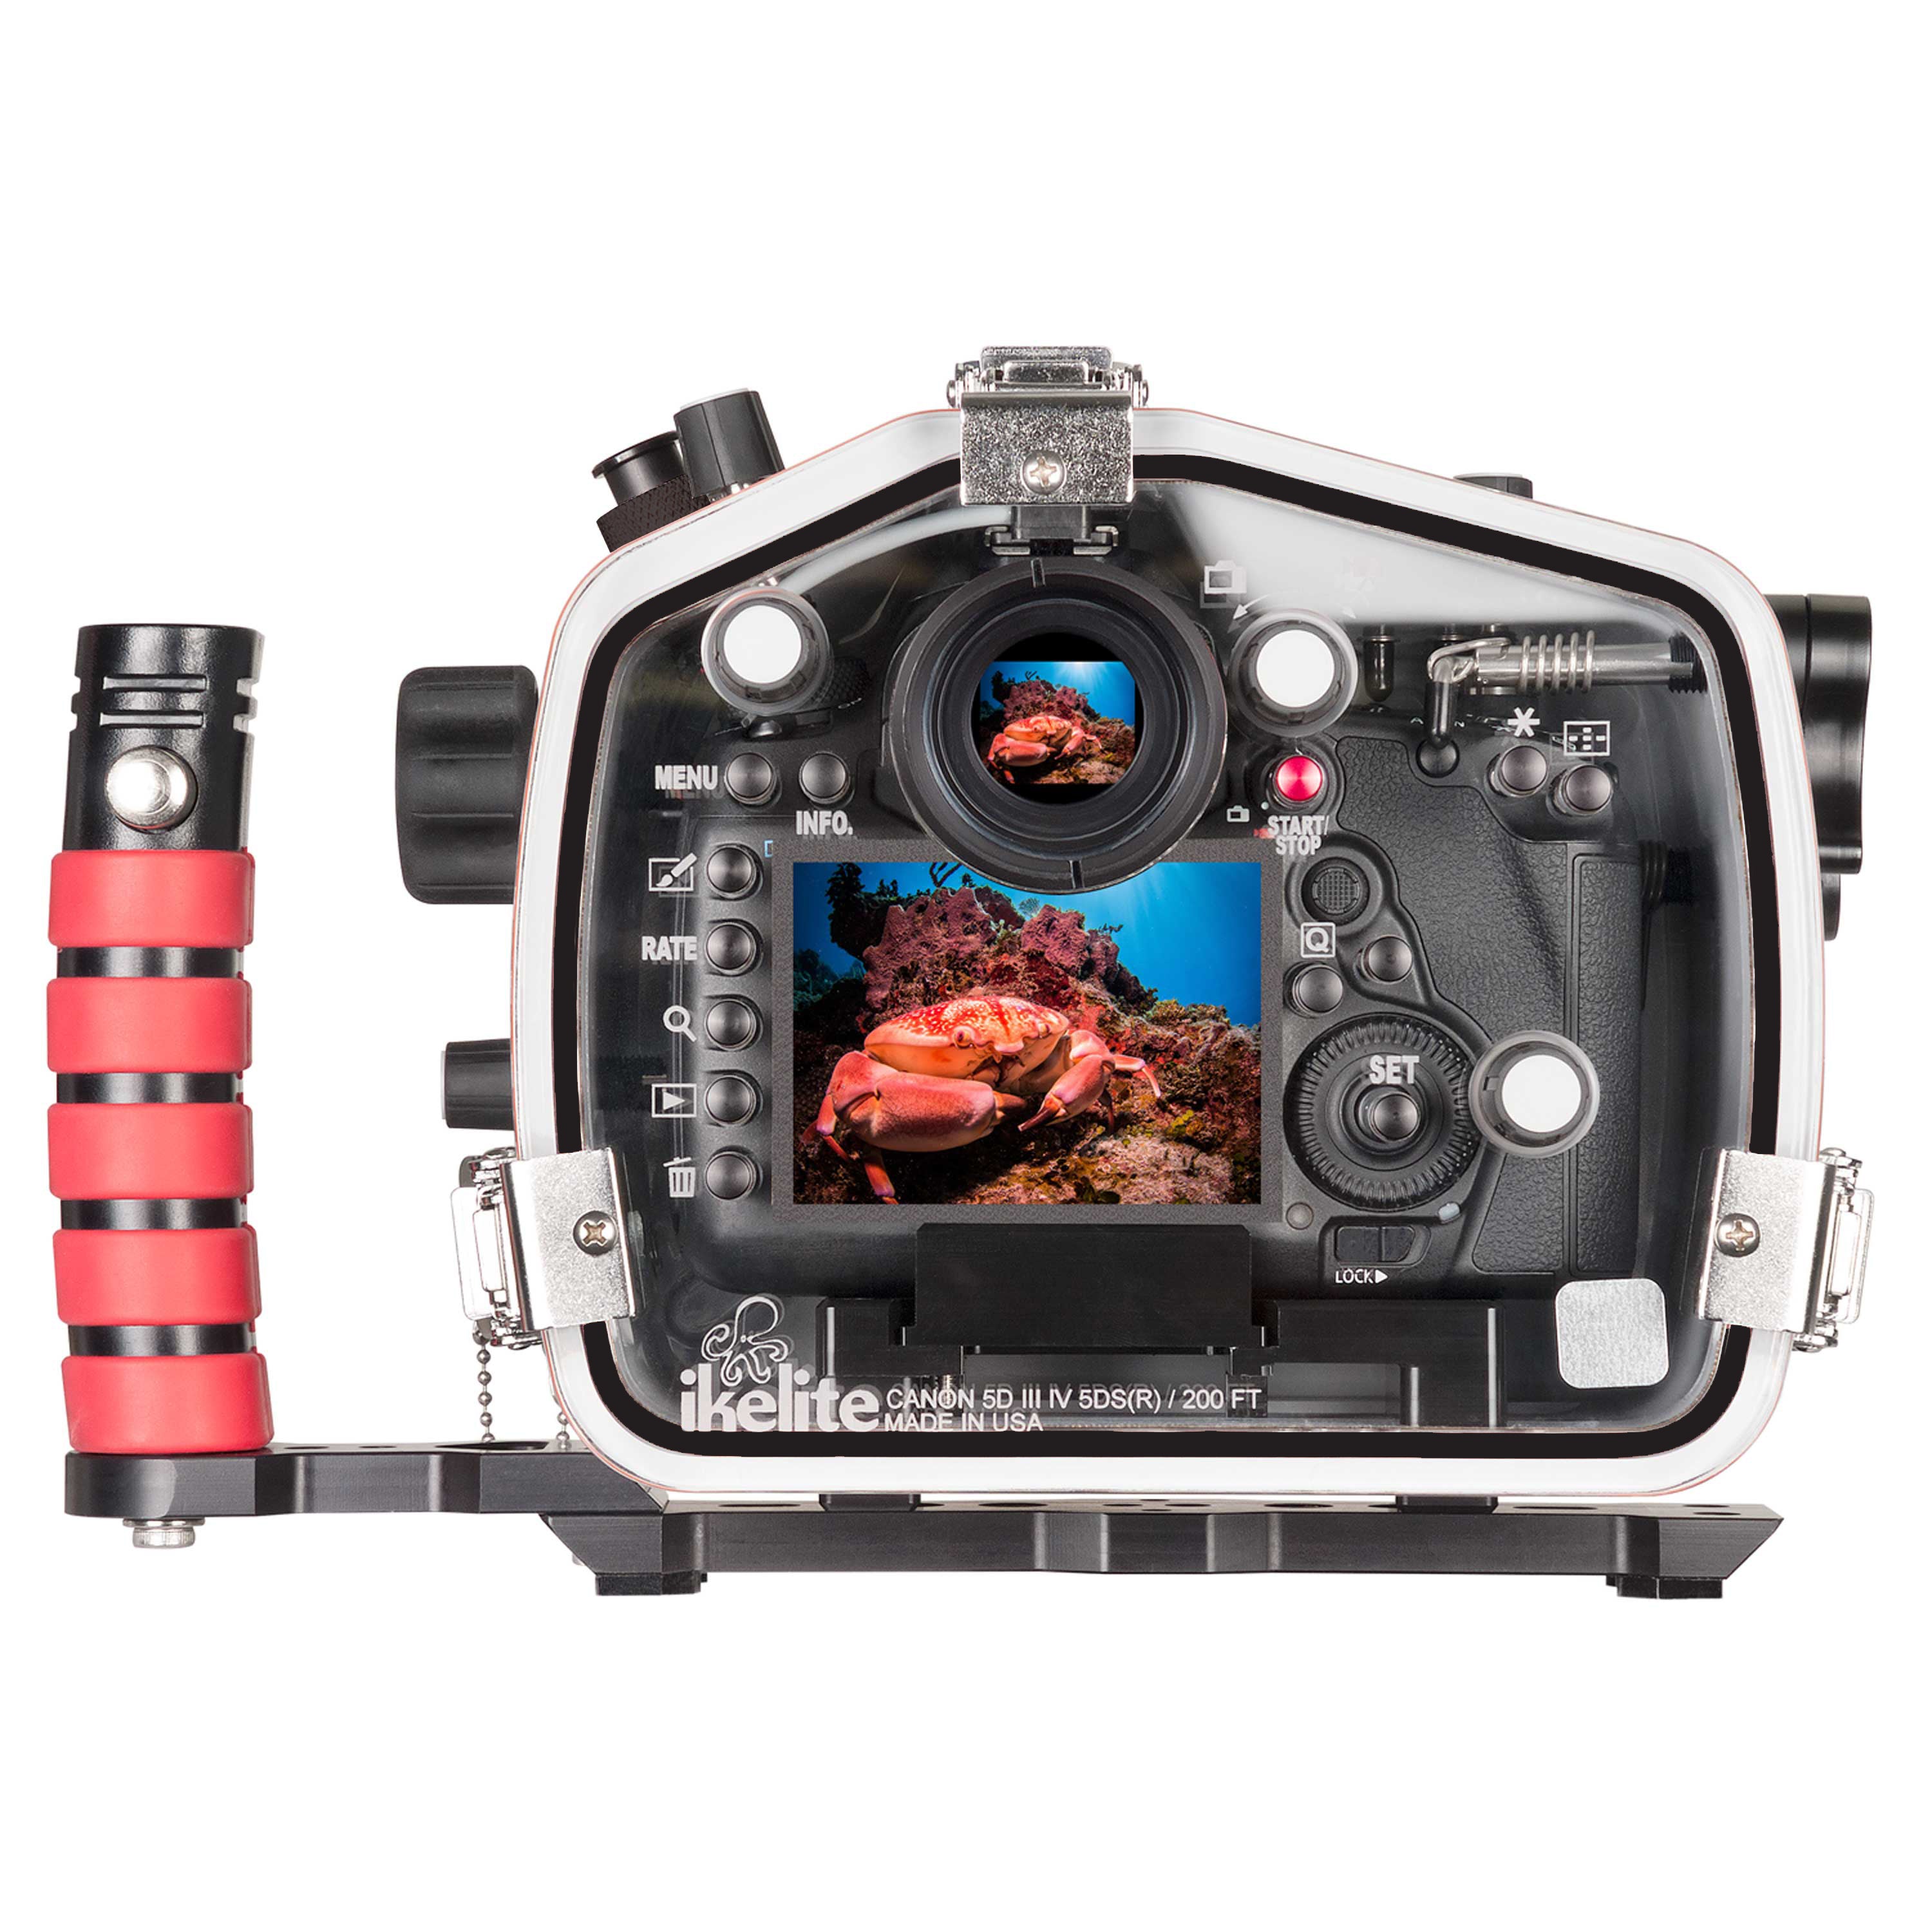 analogie Helemaal droog Arctic 200DL Underwater Housing for Canon EOS 5D Mark III, 5D Mark IV, 5DS, 5